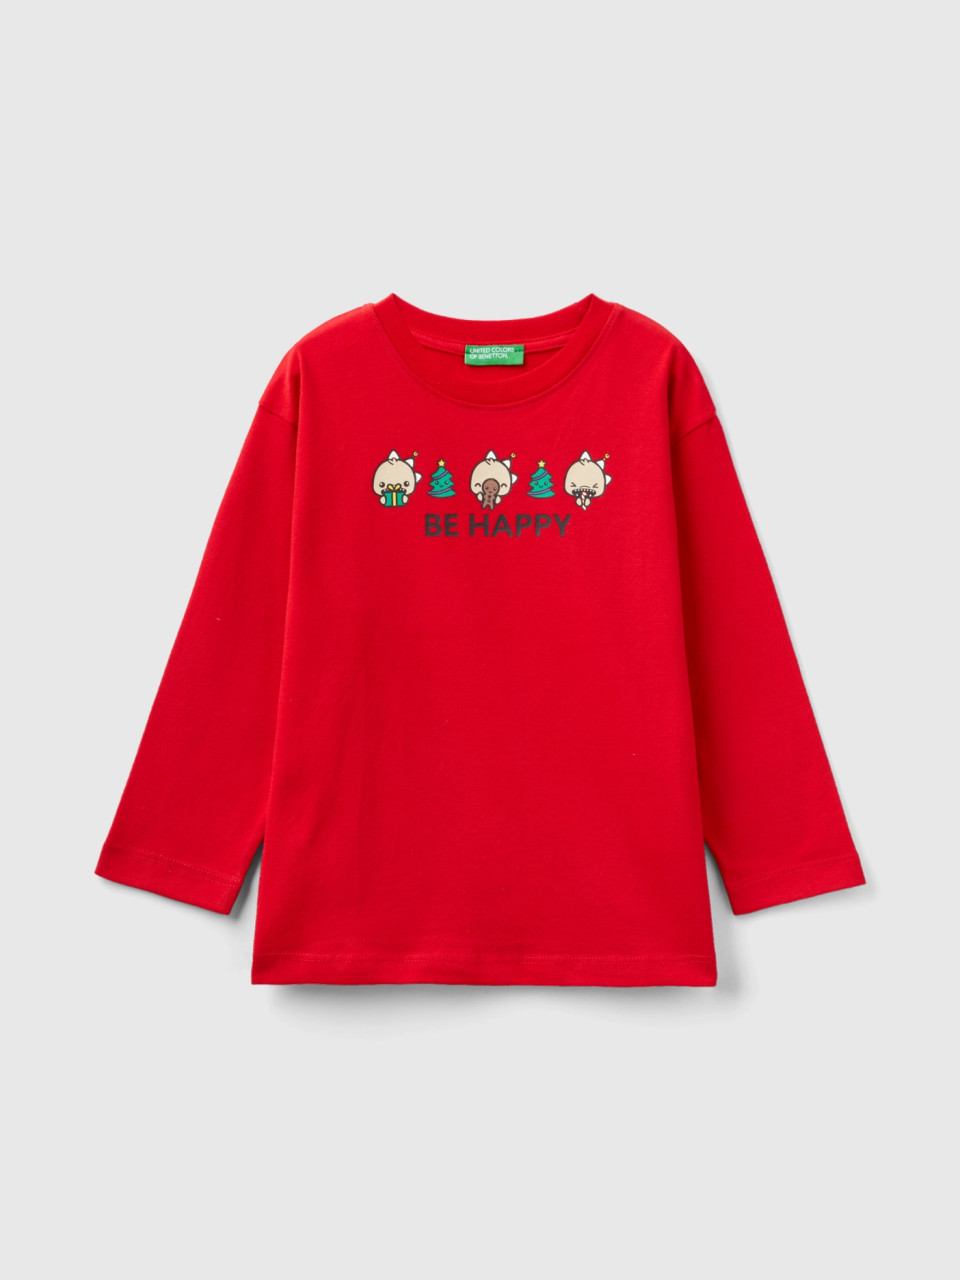 Benetton, Warm T-shirt With Christmas Print, Red, Kids